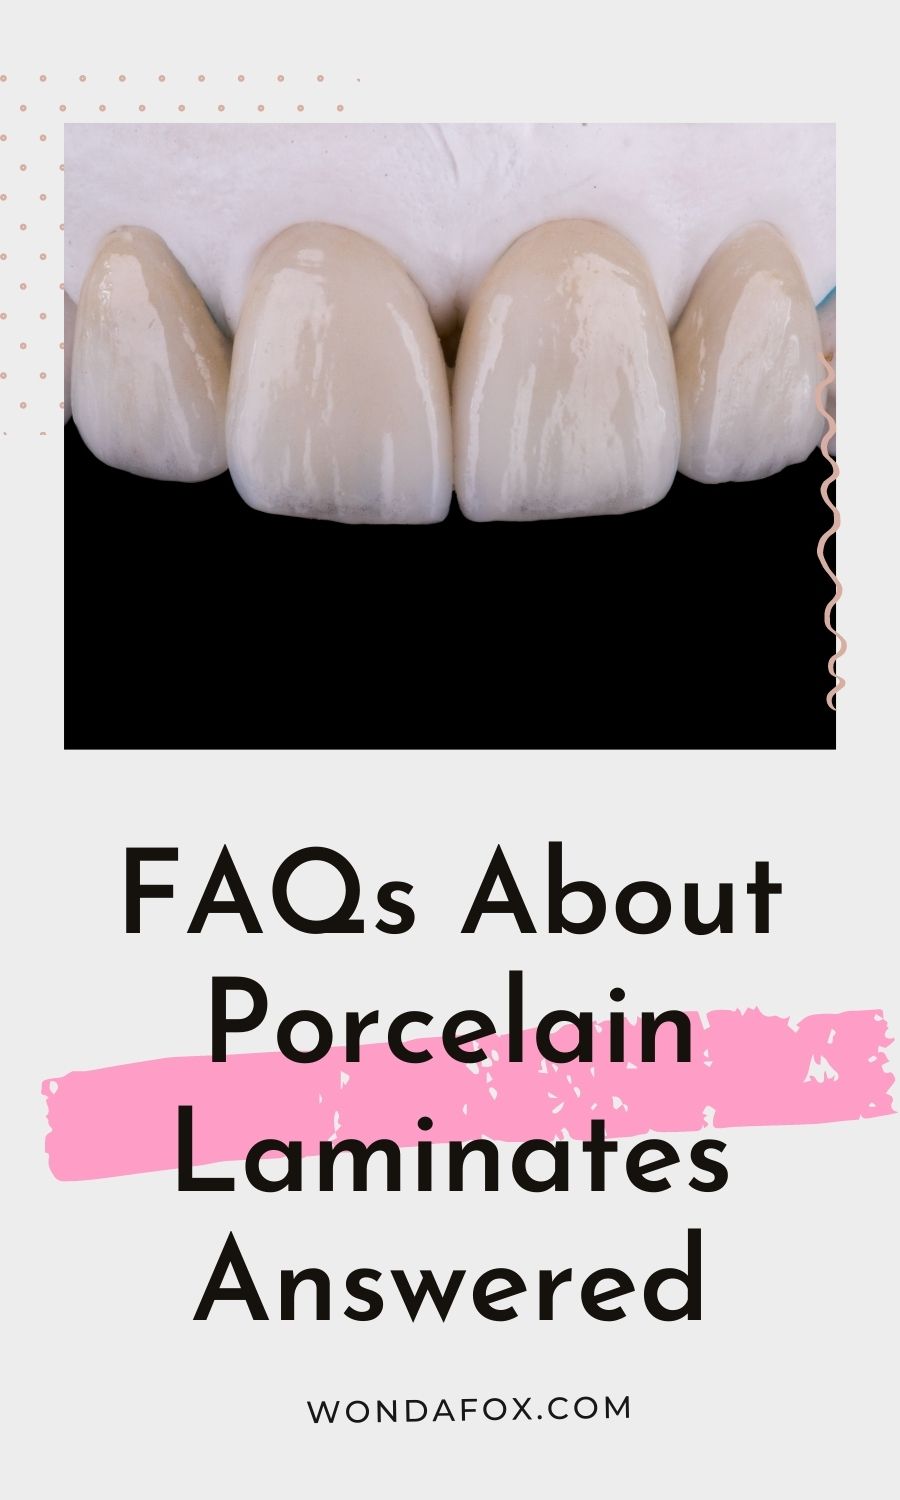 FAQs About Porcelain Laminates Answered